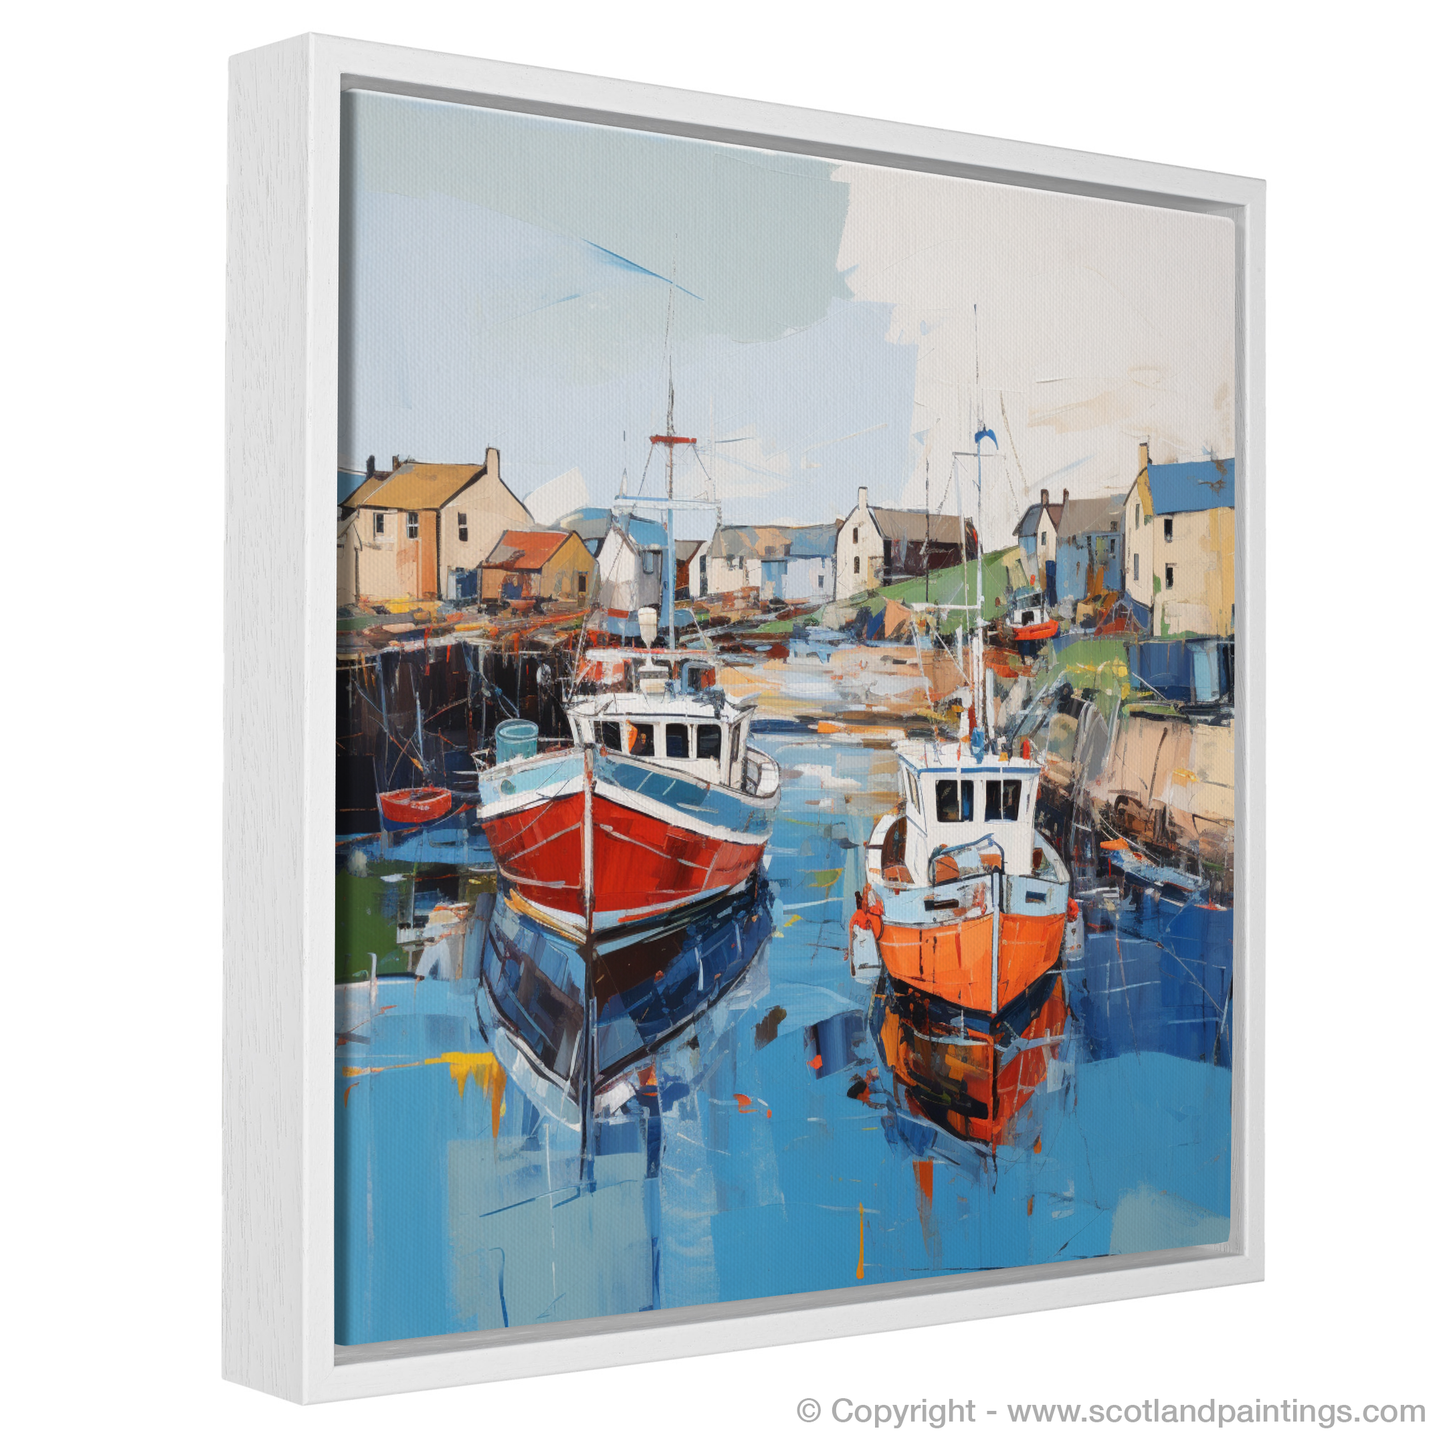 Painting and Art Print of Whitehills Harbour, Aberdeenshire entitled "Vibrant Essence of Whitehills Harbour".